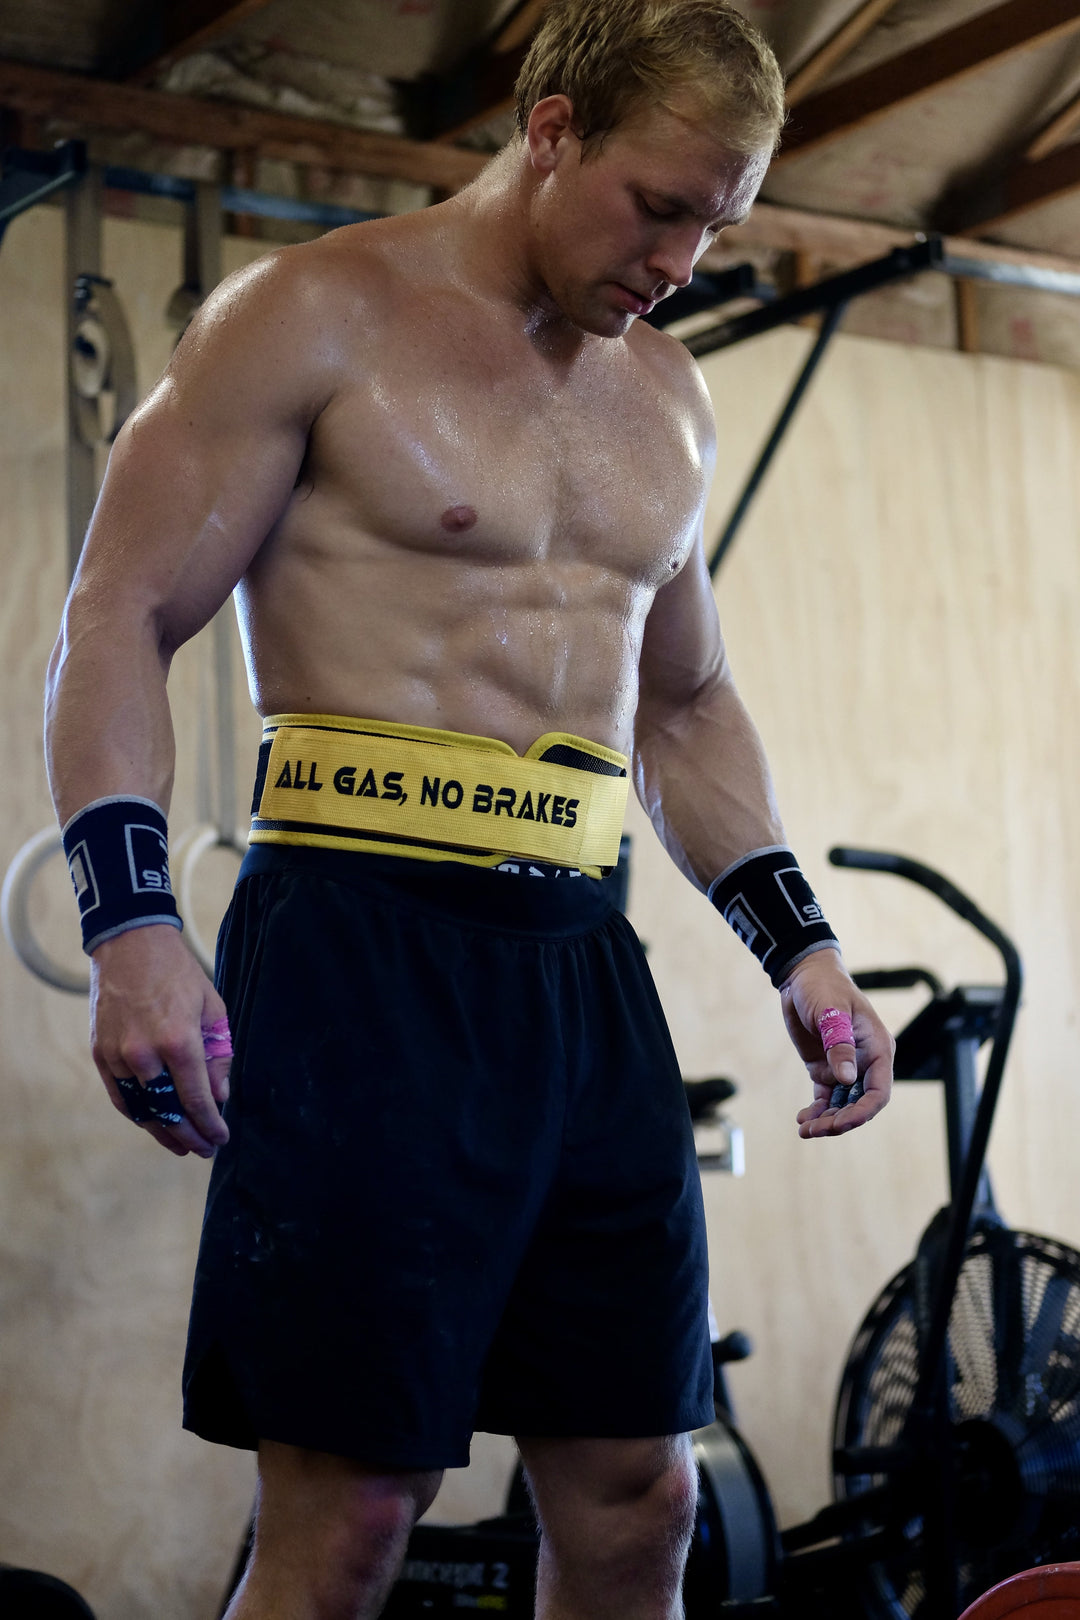 Limited Edition "All Gas, No Brakes" Weightlifting Belt By Sam Kwant